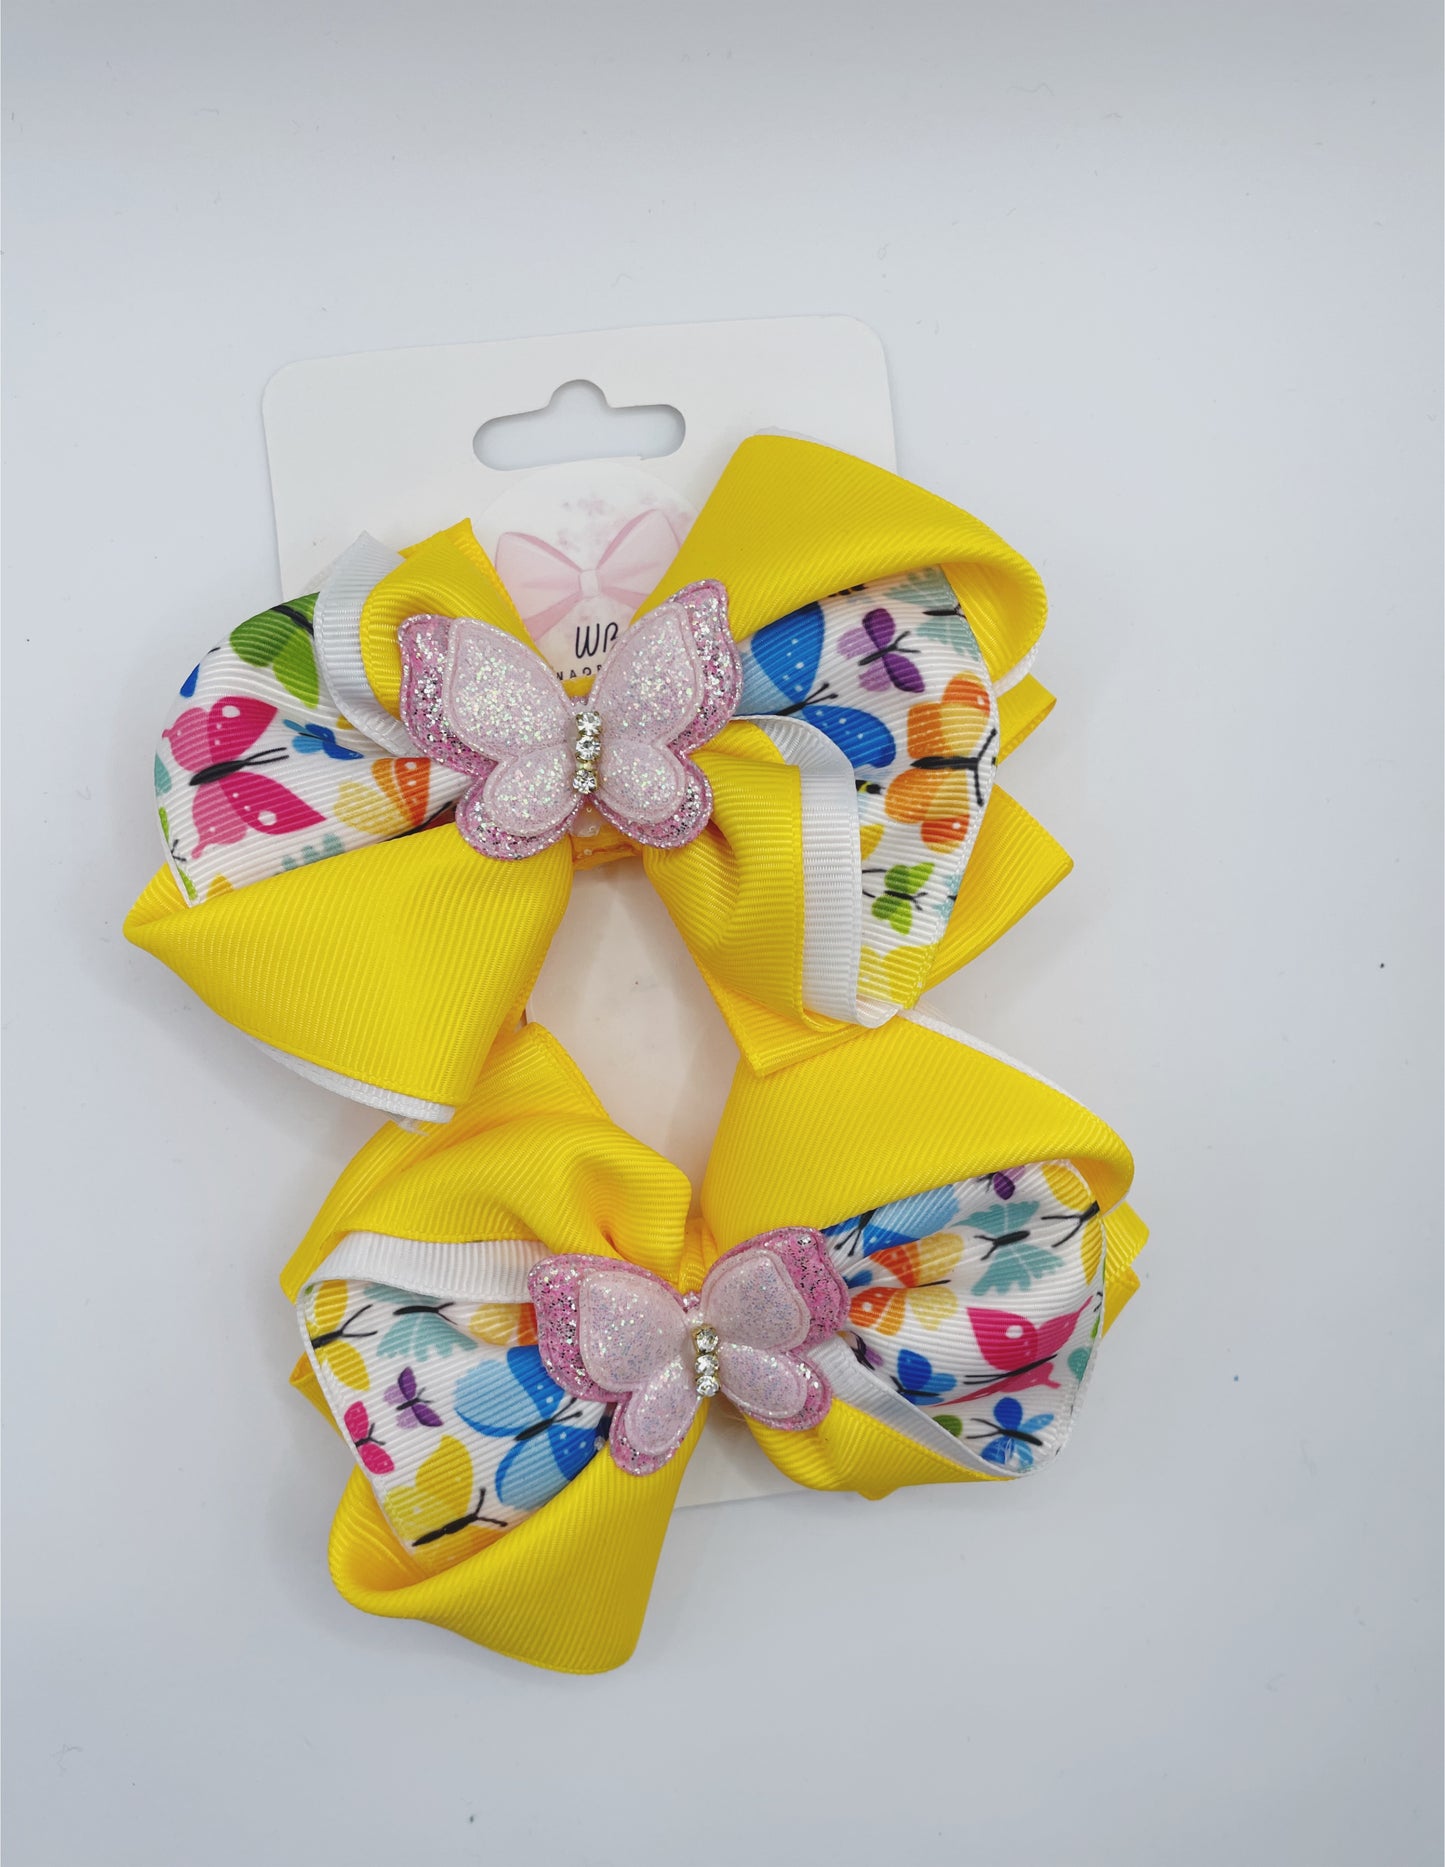 Pair of Bows for Girls Handmade Girl Hair Bow Pair Yellow Pair of Bows for Infants Toddlers Kids Teens Butterfly Inspired Pair of Bows for Girl Hair Bows for Girl